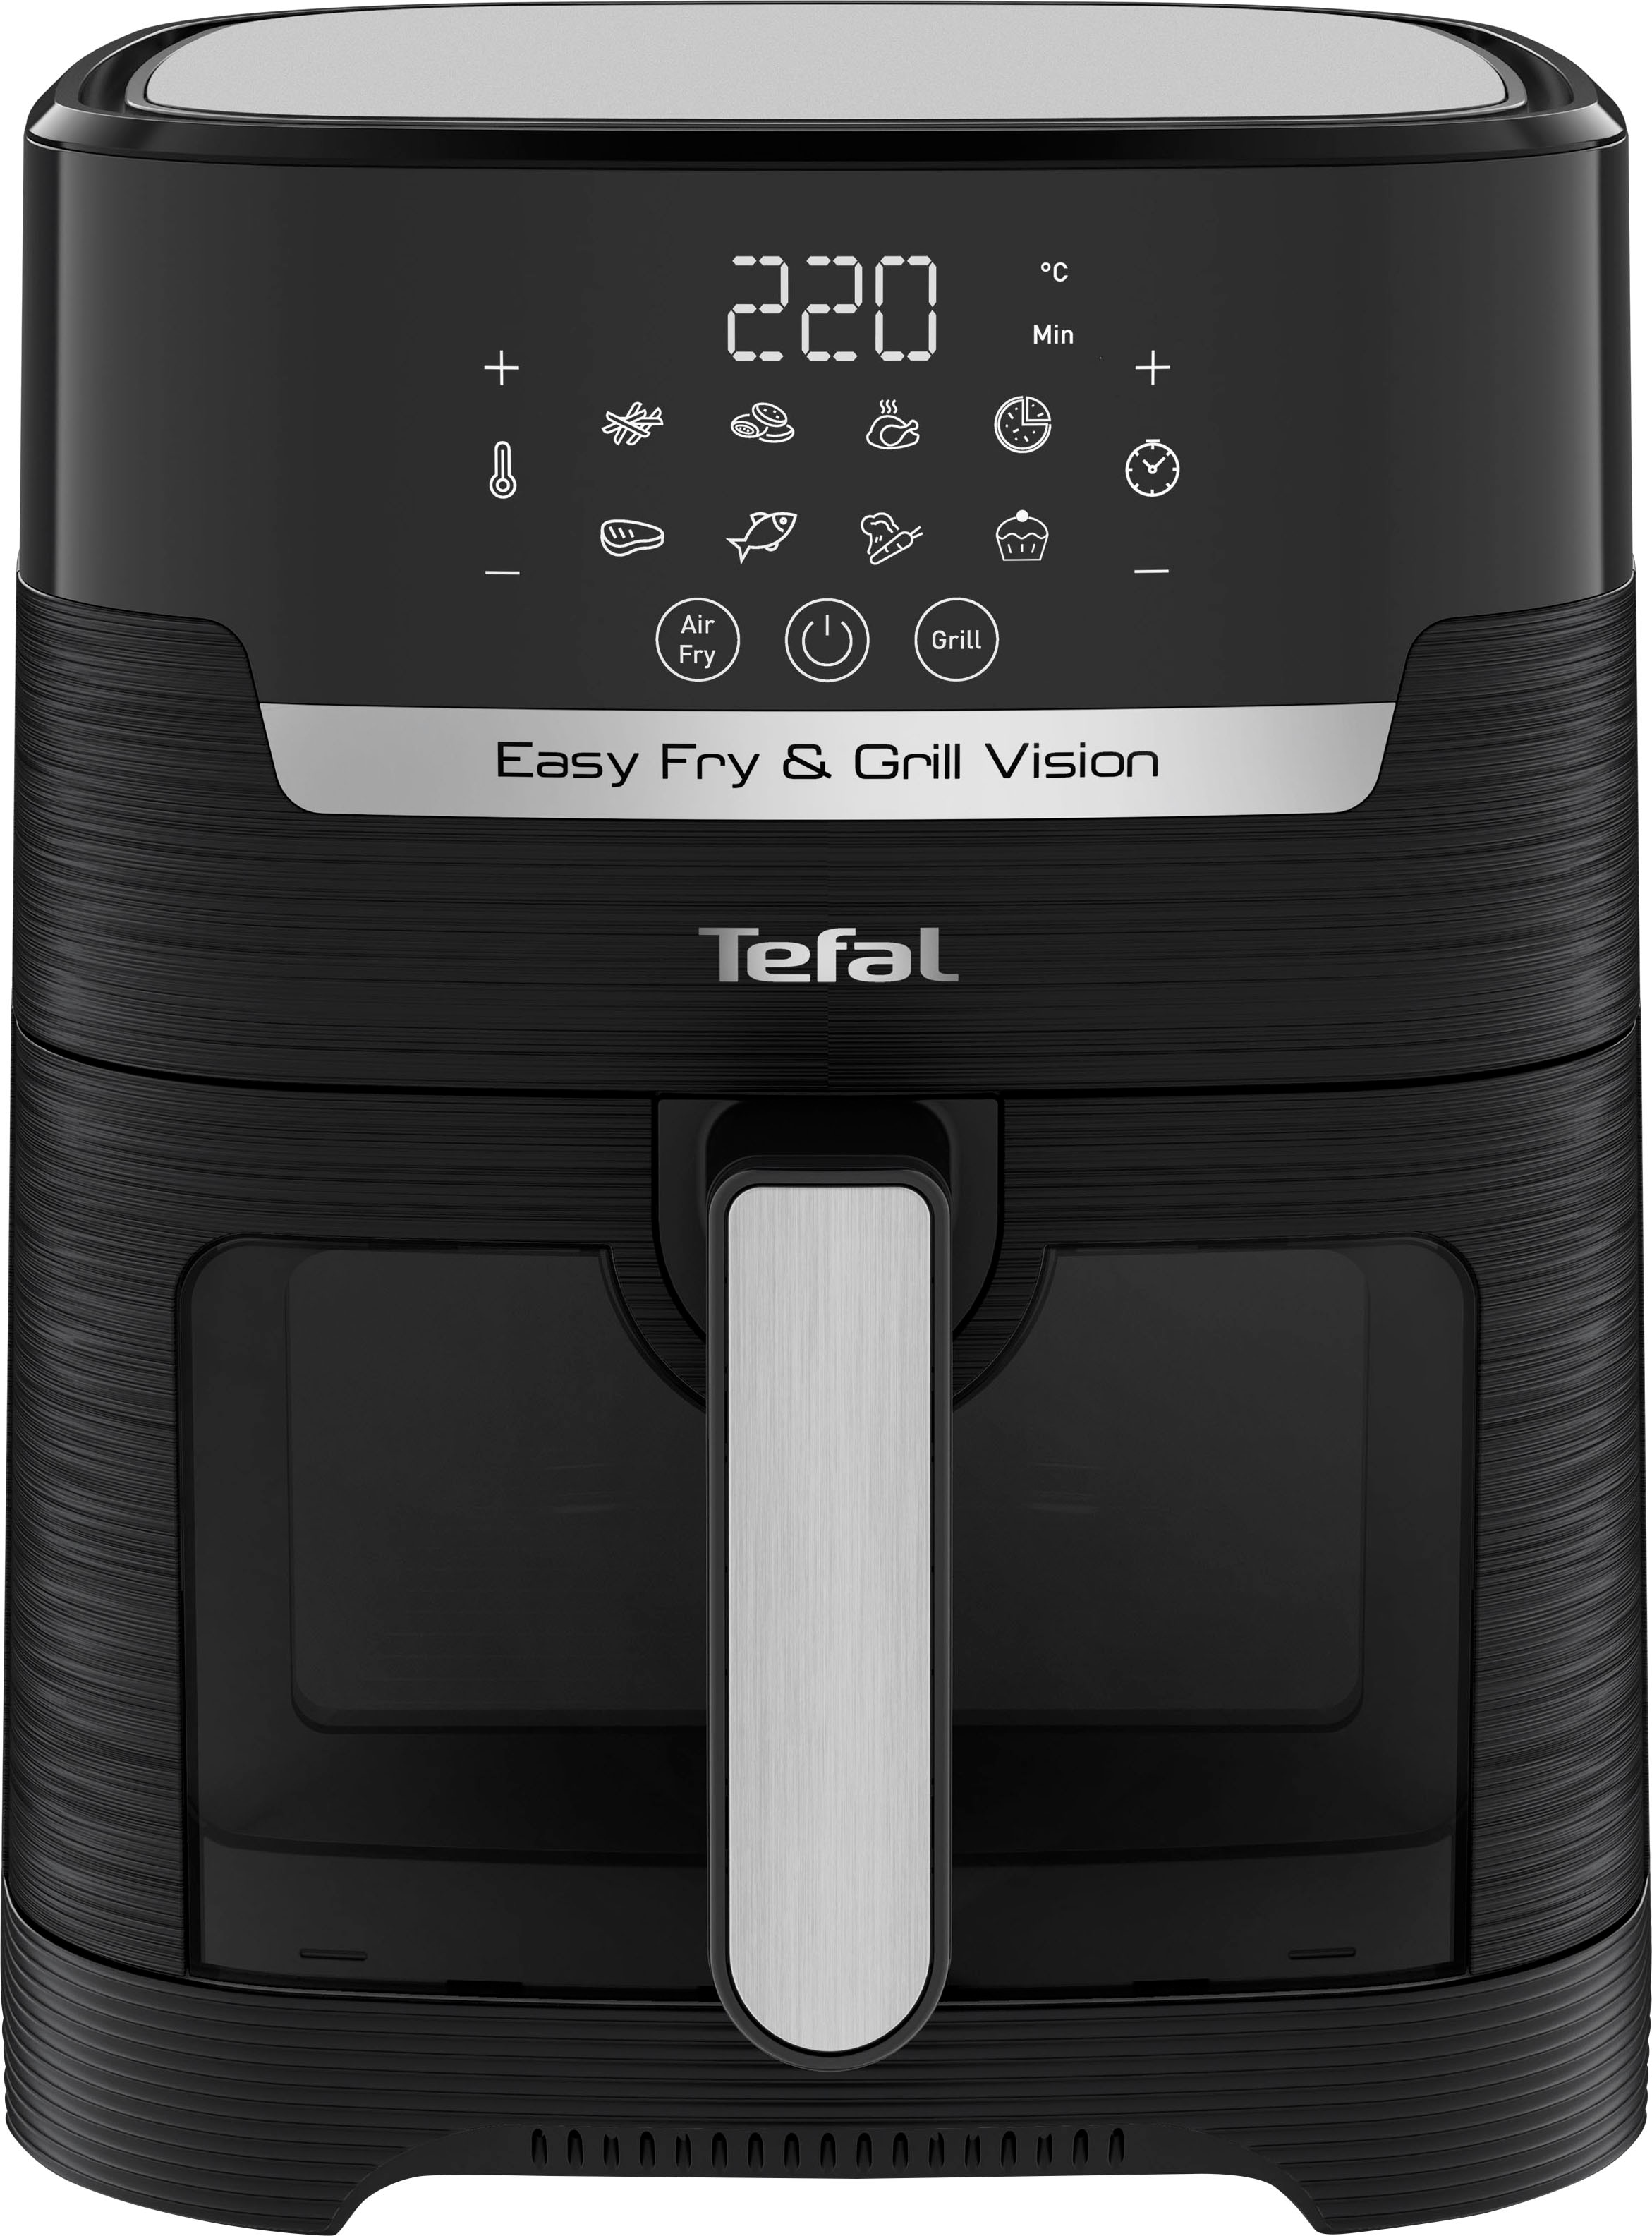 Tefal Heißluftfritteuse »EY5068 Easy Fry & Grill Vision«, 1550 W